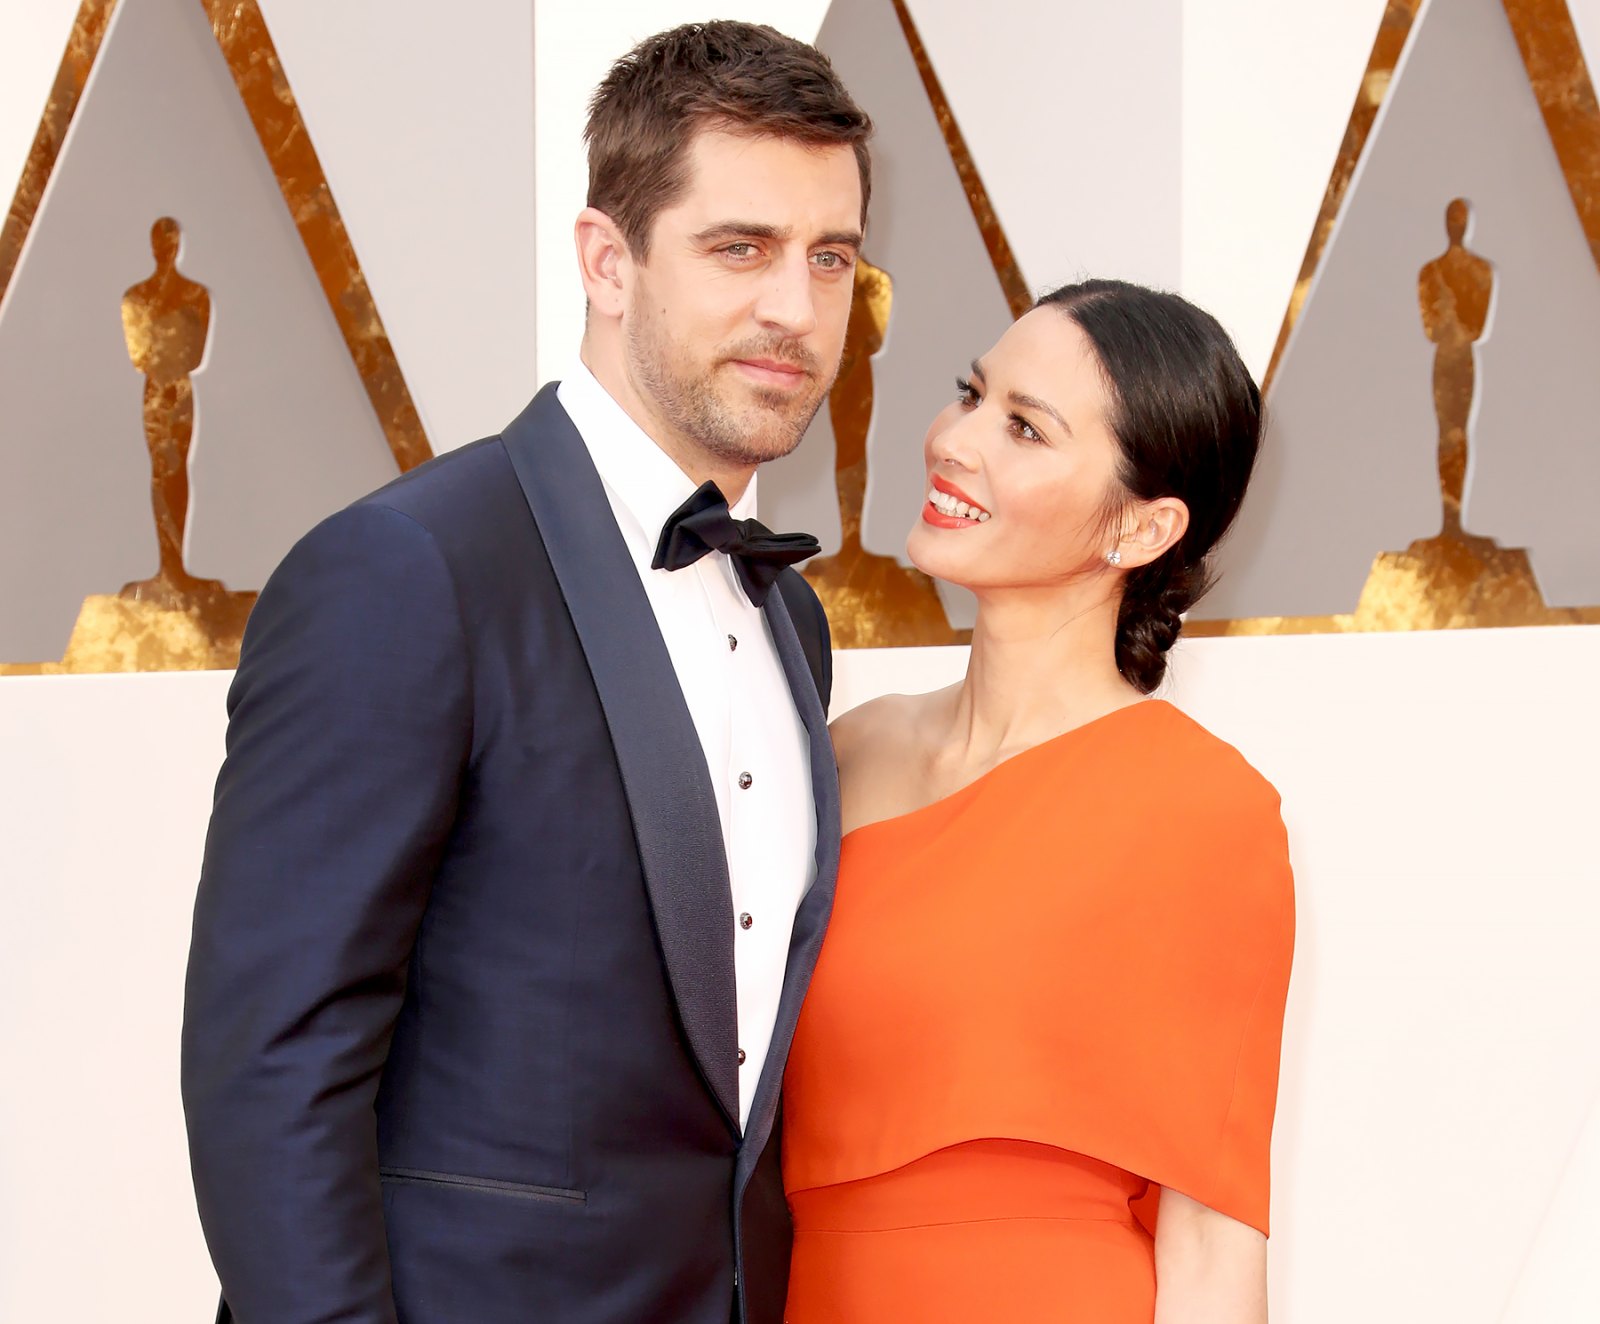 Olivia-Munn-caused-tension-between-Aaron-and-his-family